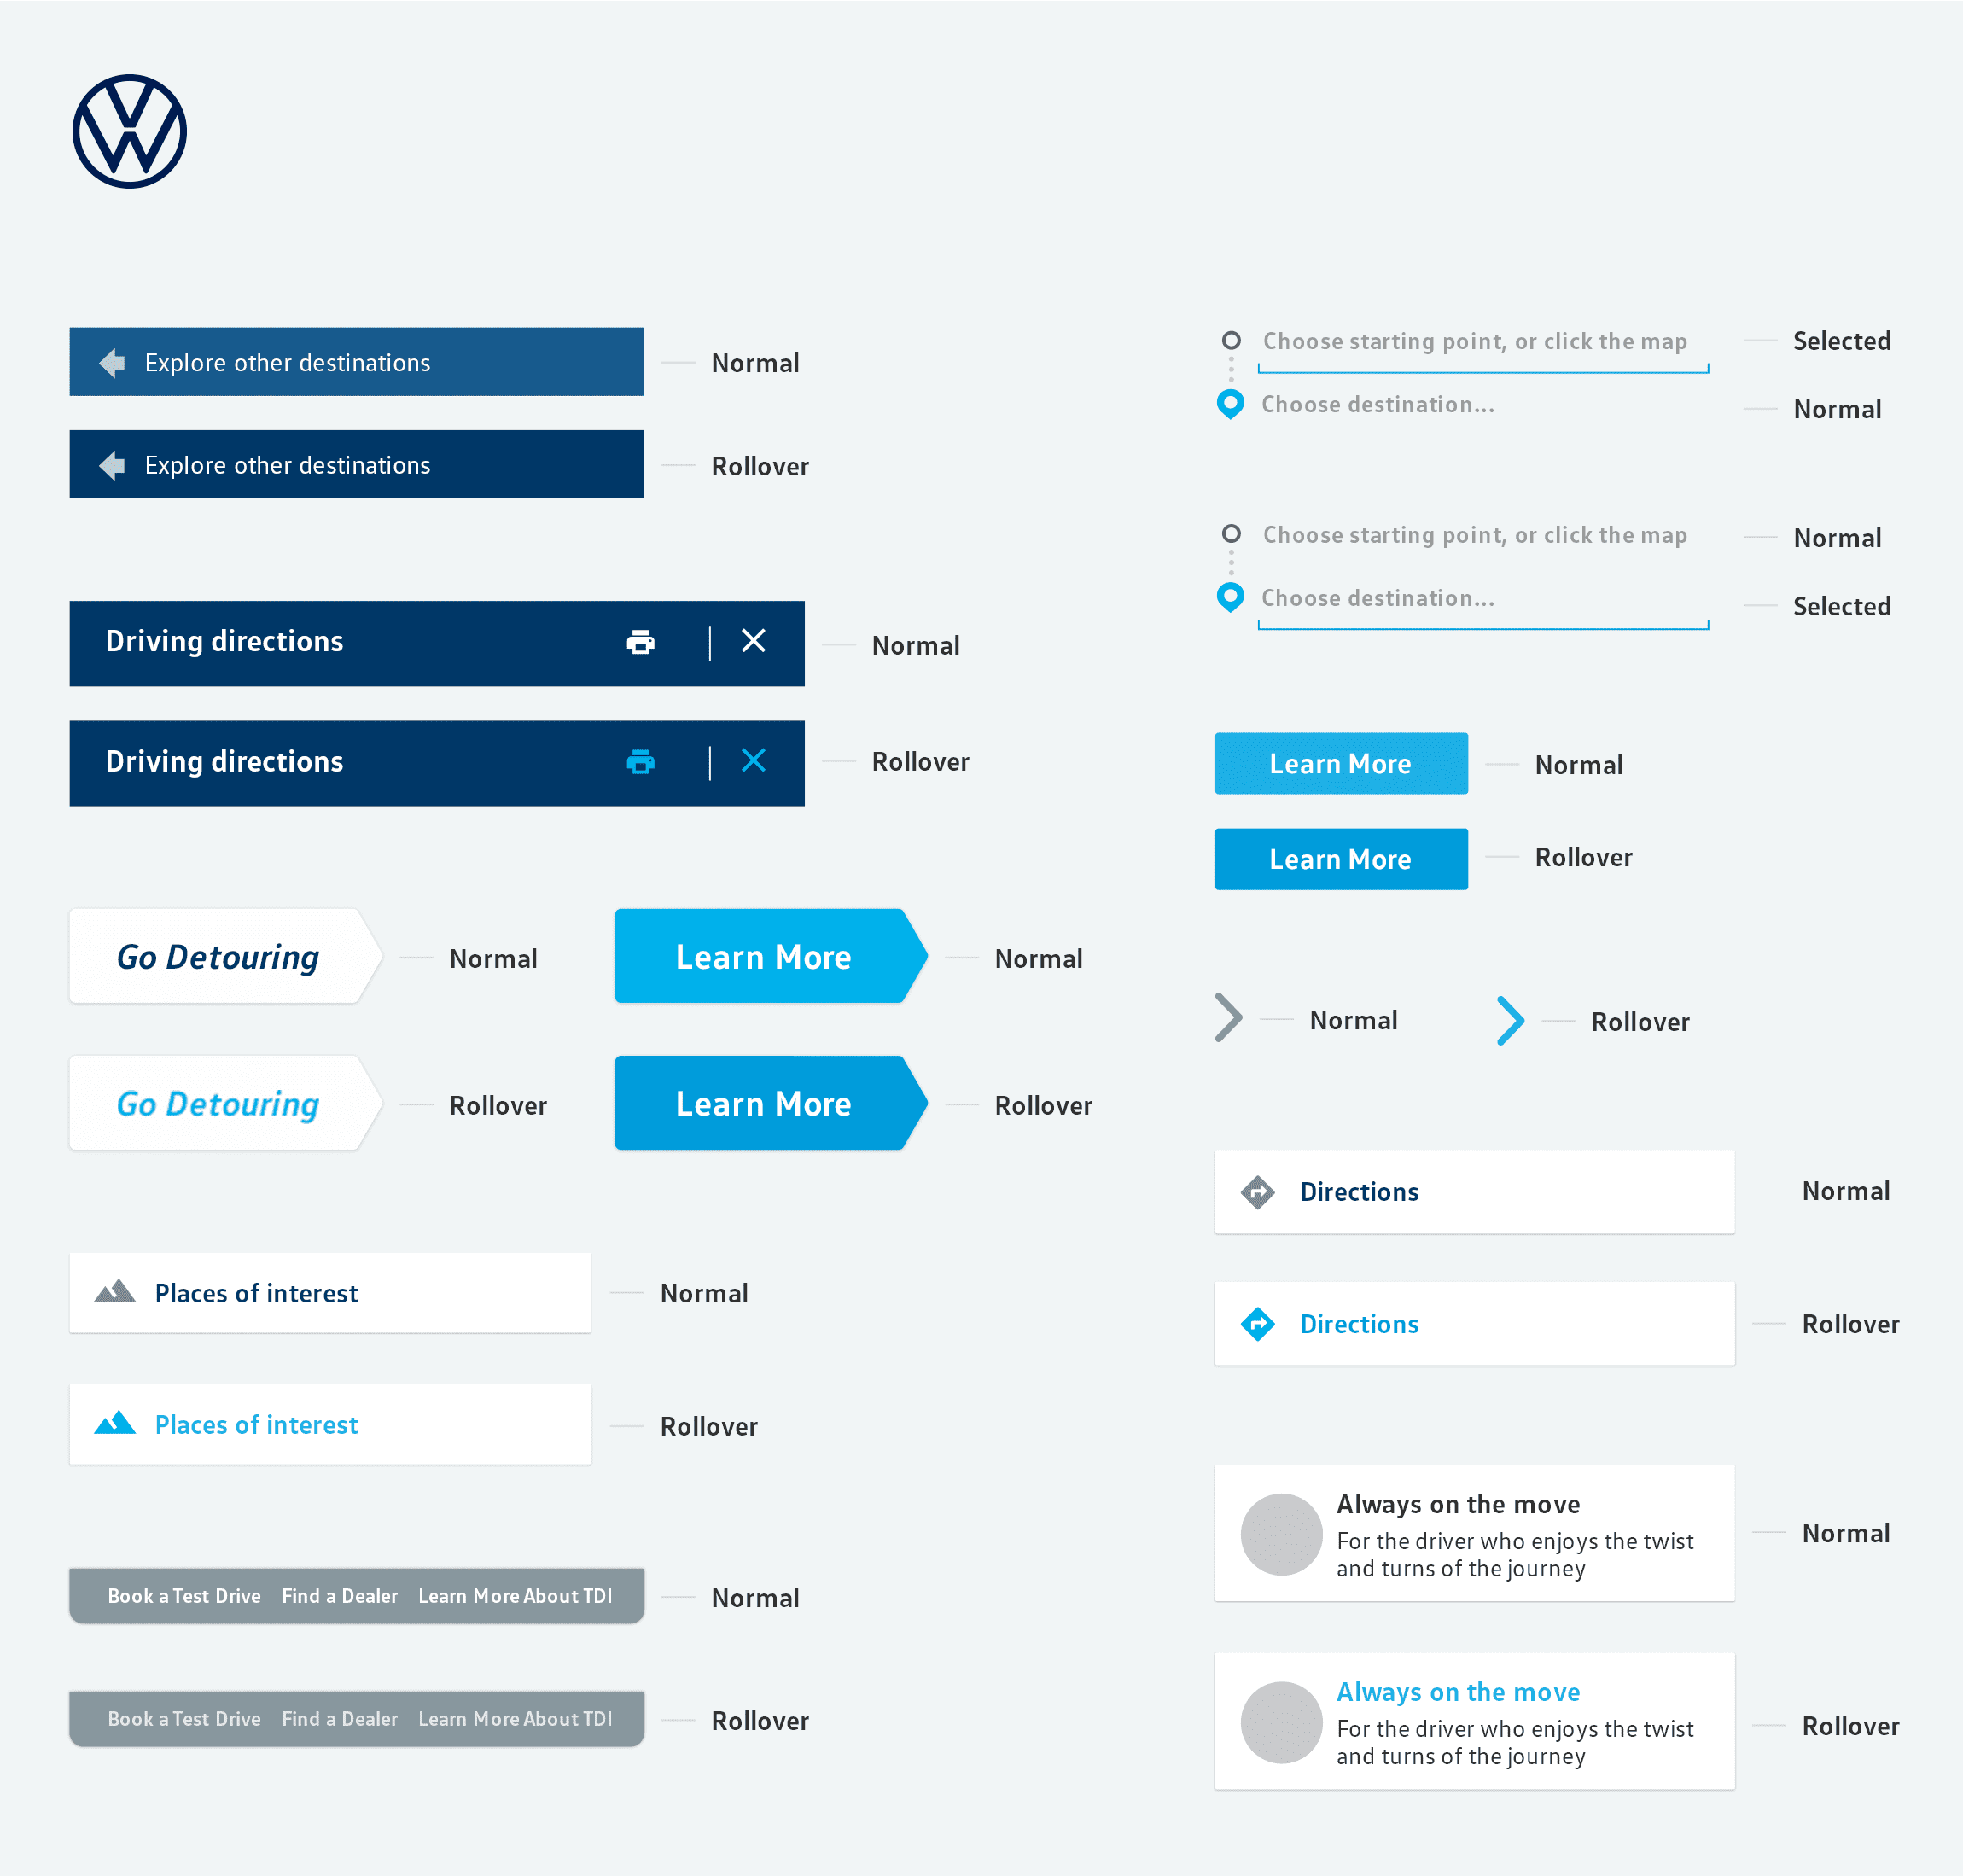 VW style guide for web